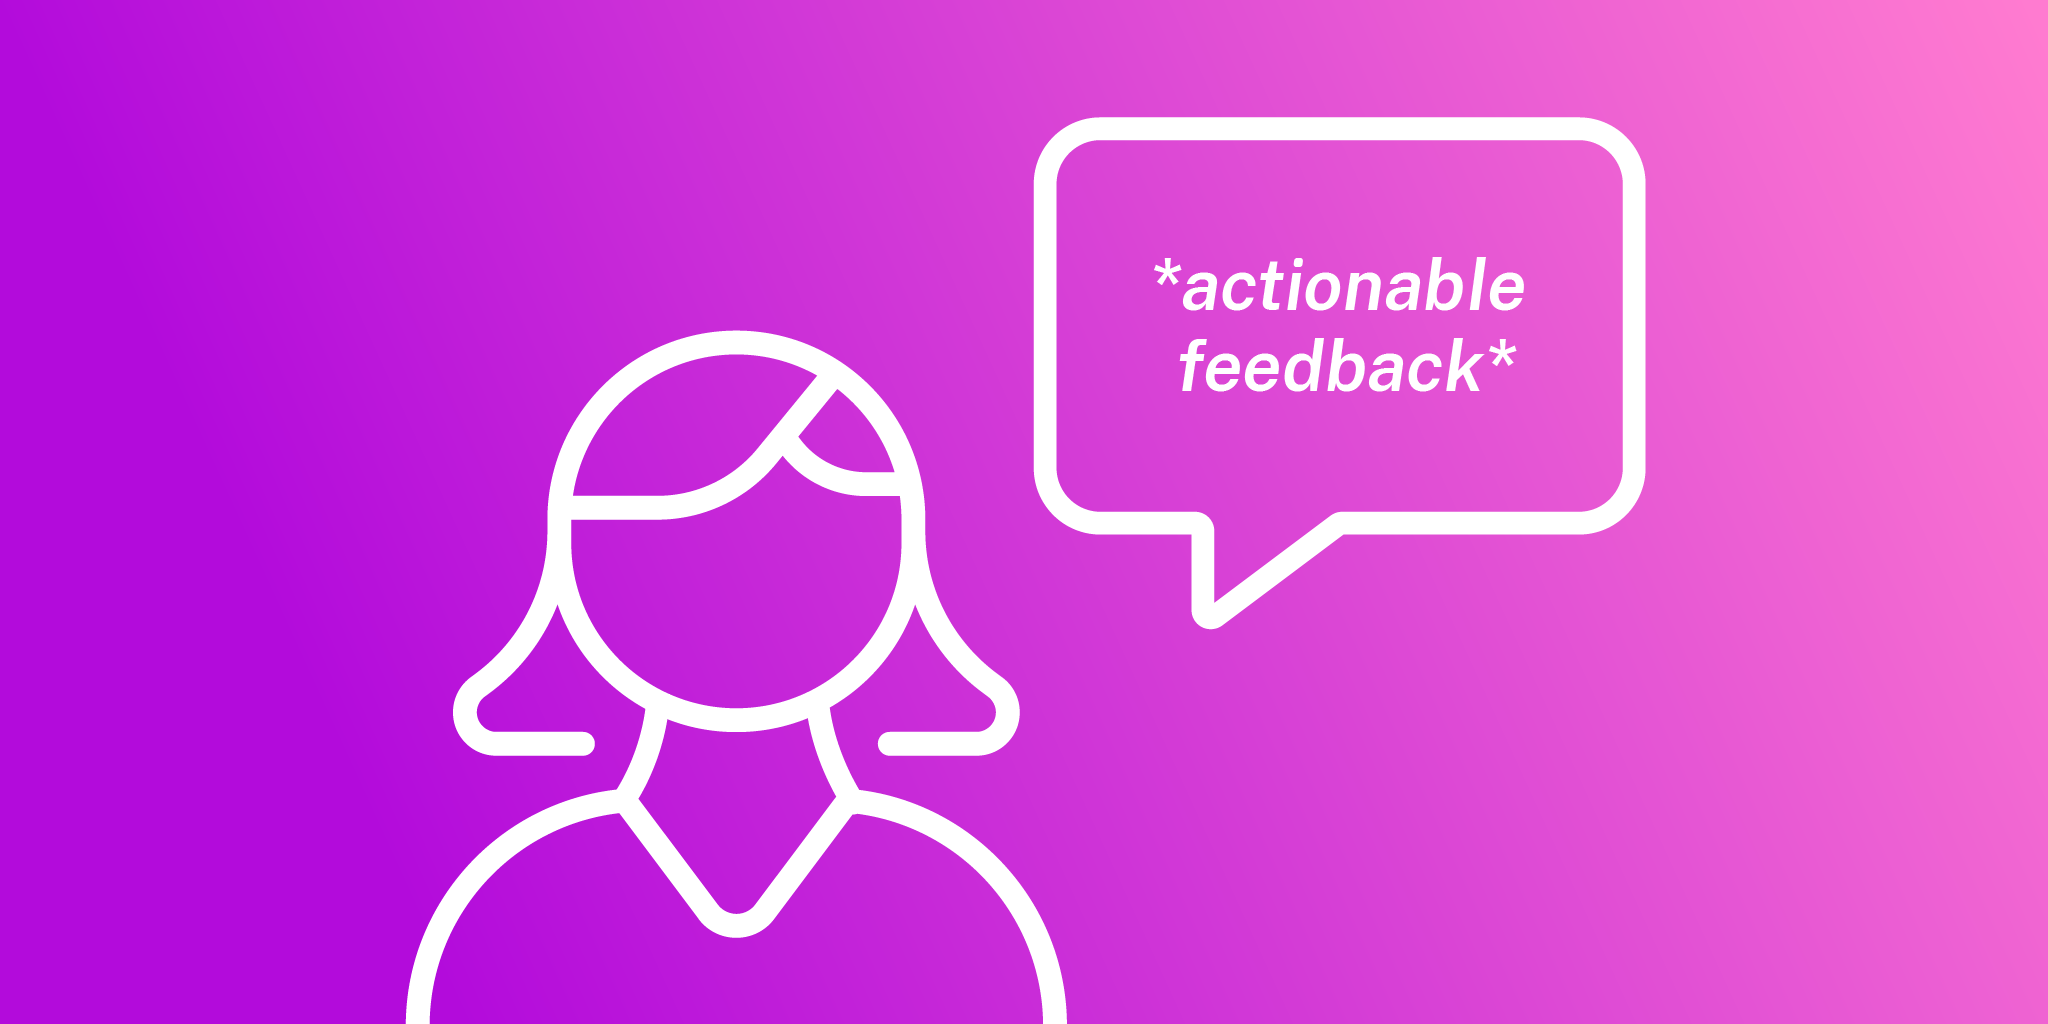 Purple and pink image with a woman that says "actionable feedback"